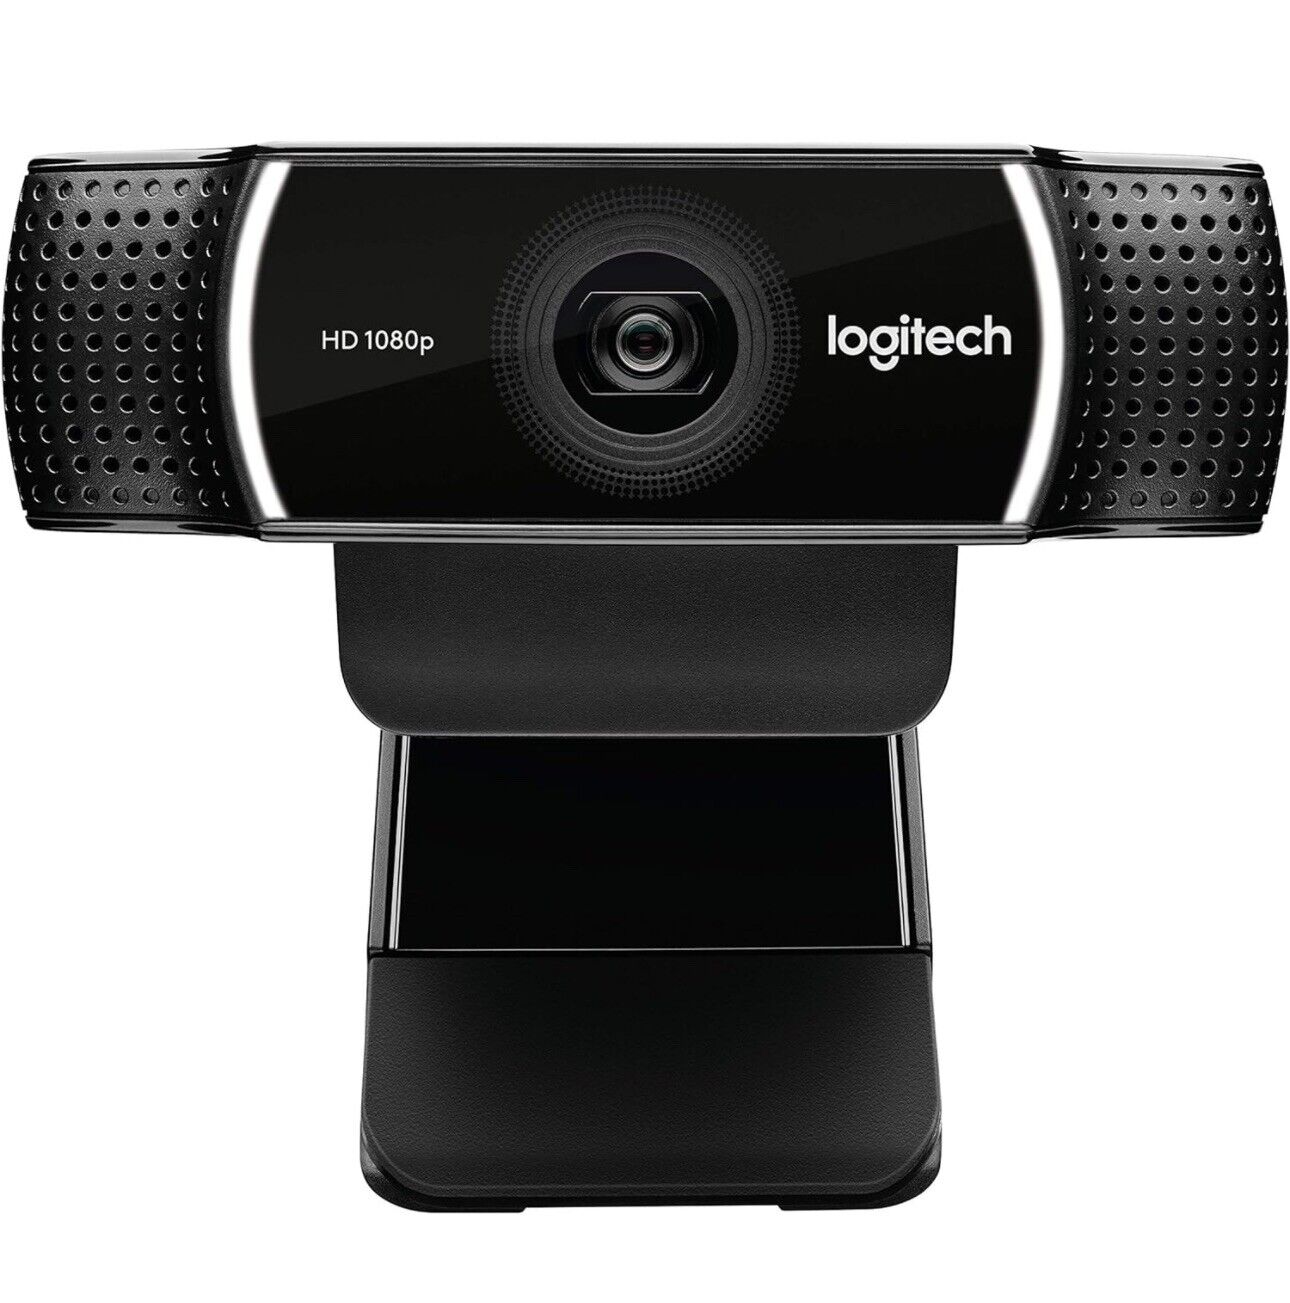 Logitech 1080p Pro Stream Webcam for HD Streaming at 1080p 30 FPS